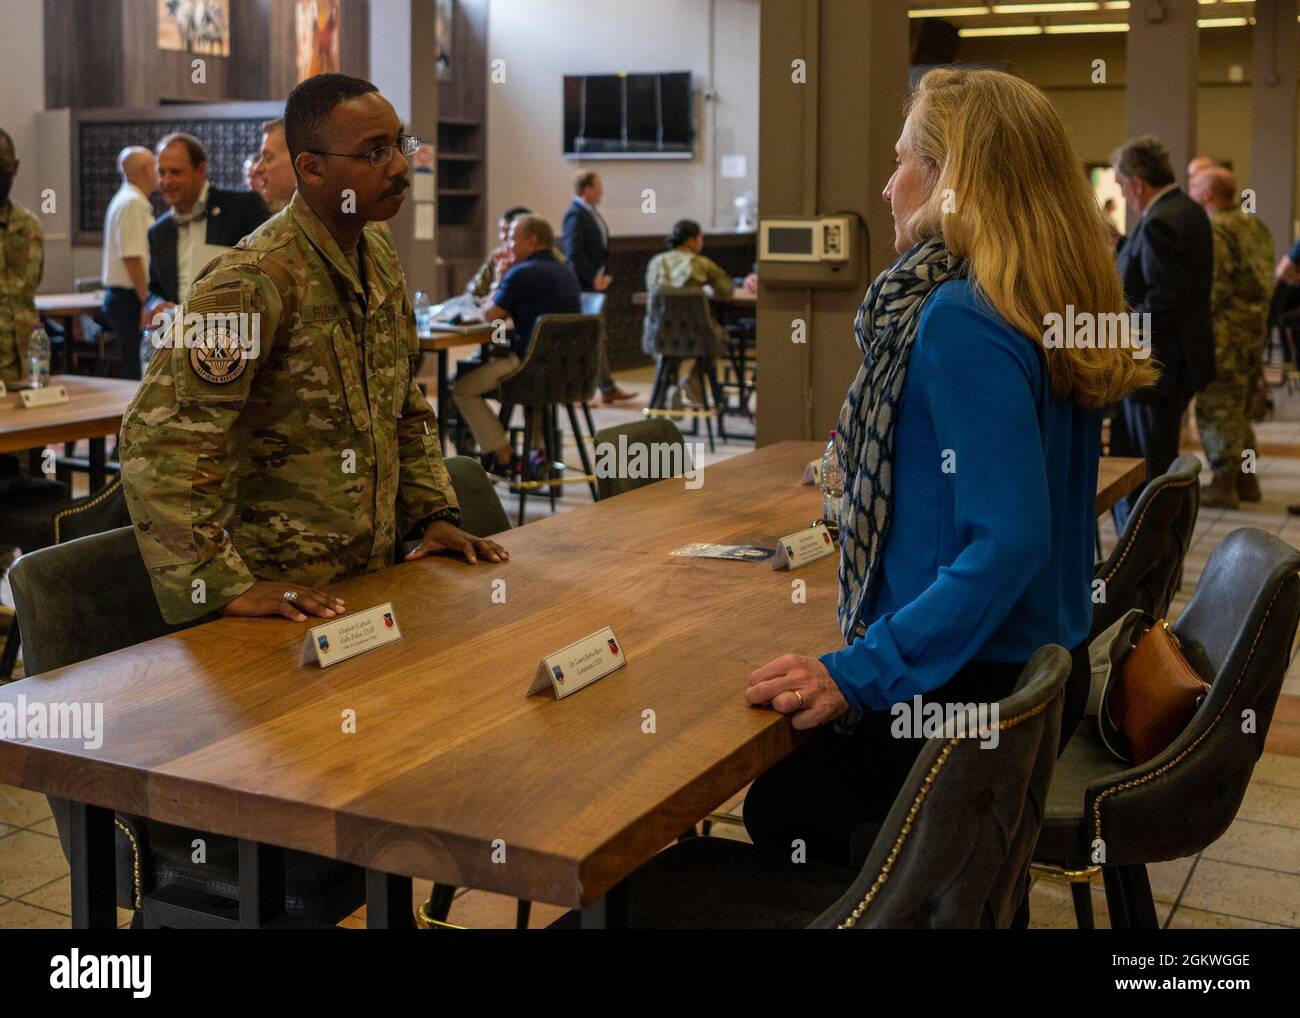 Virginia Rep. Abigail Spanberger speaks with Capt. Colby Felton, 379 Air Expeditionary Wing chaplain, during a Congressional Delegation visit to Al Udeid Air Base, Qatar, July 9, 2021. Spanberger, along with other representatives from various states and districts, met with their constituents to learn more about their service and their lives back home, as well as address any concerns they may have. Stock Photo